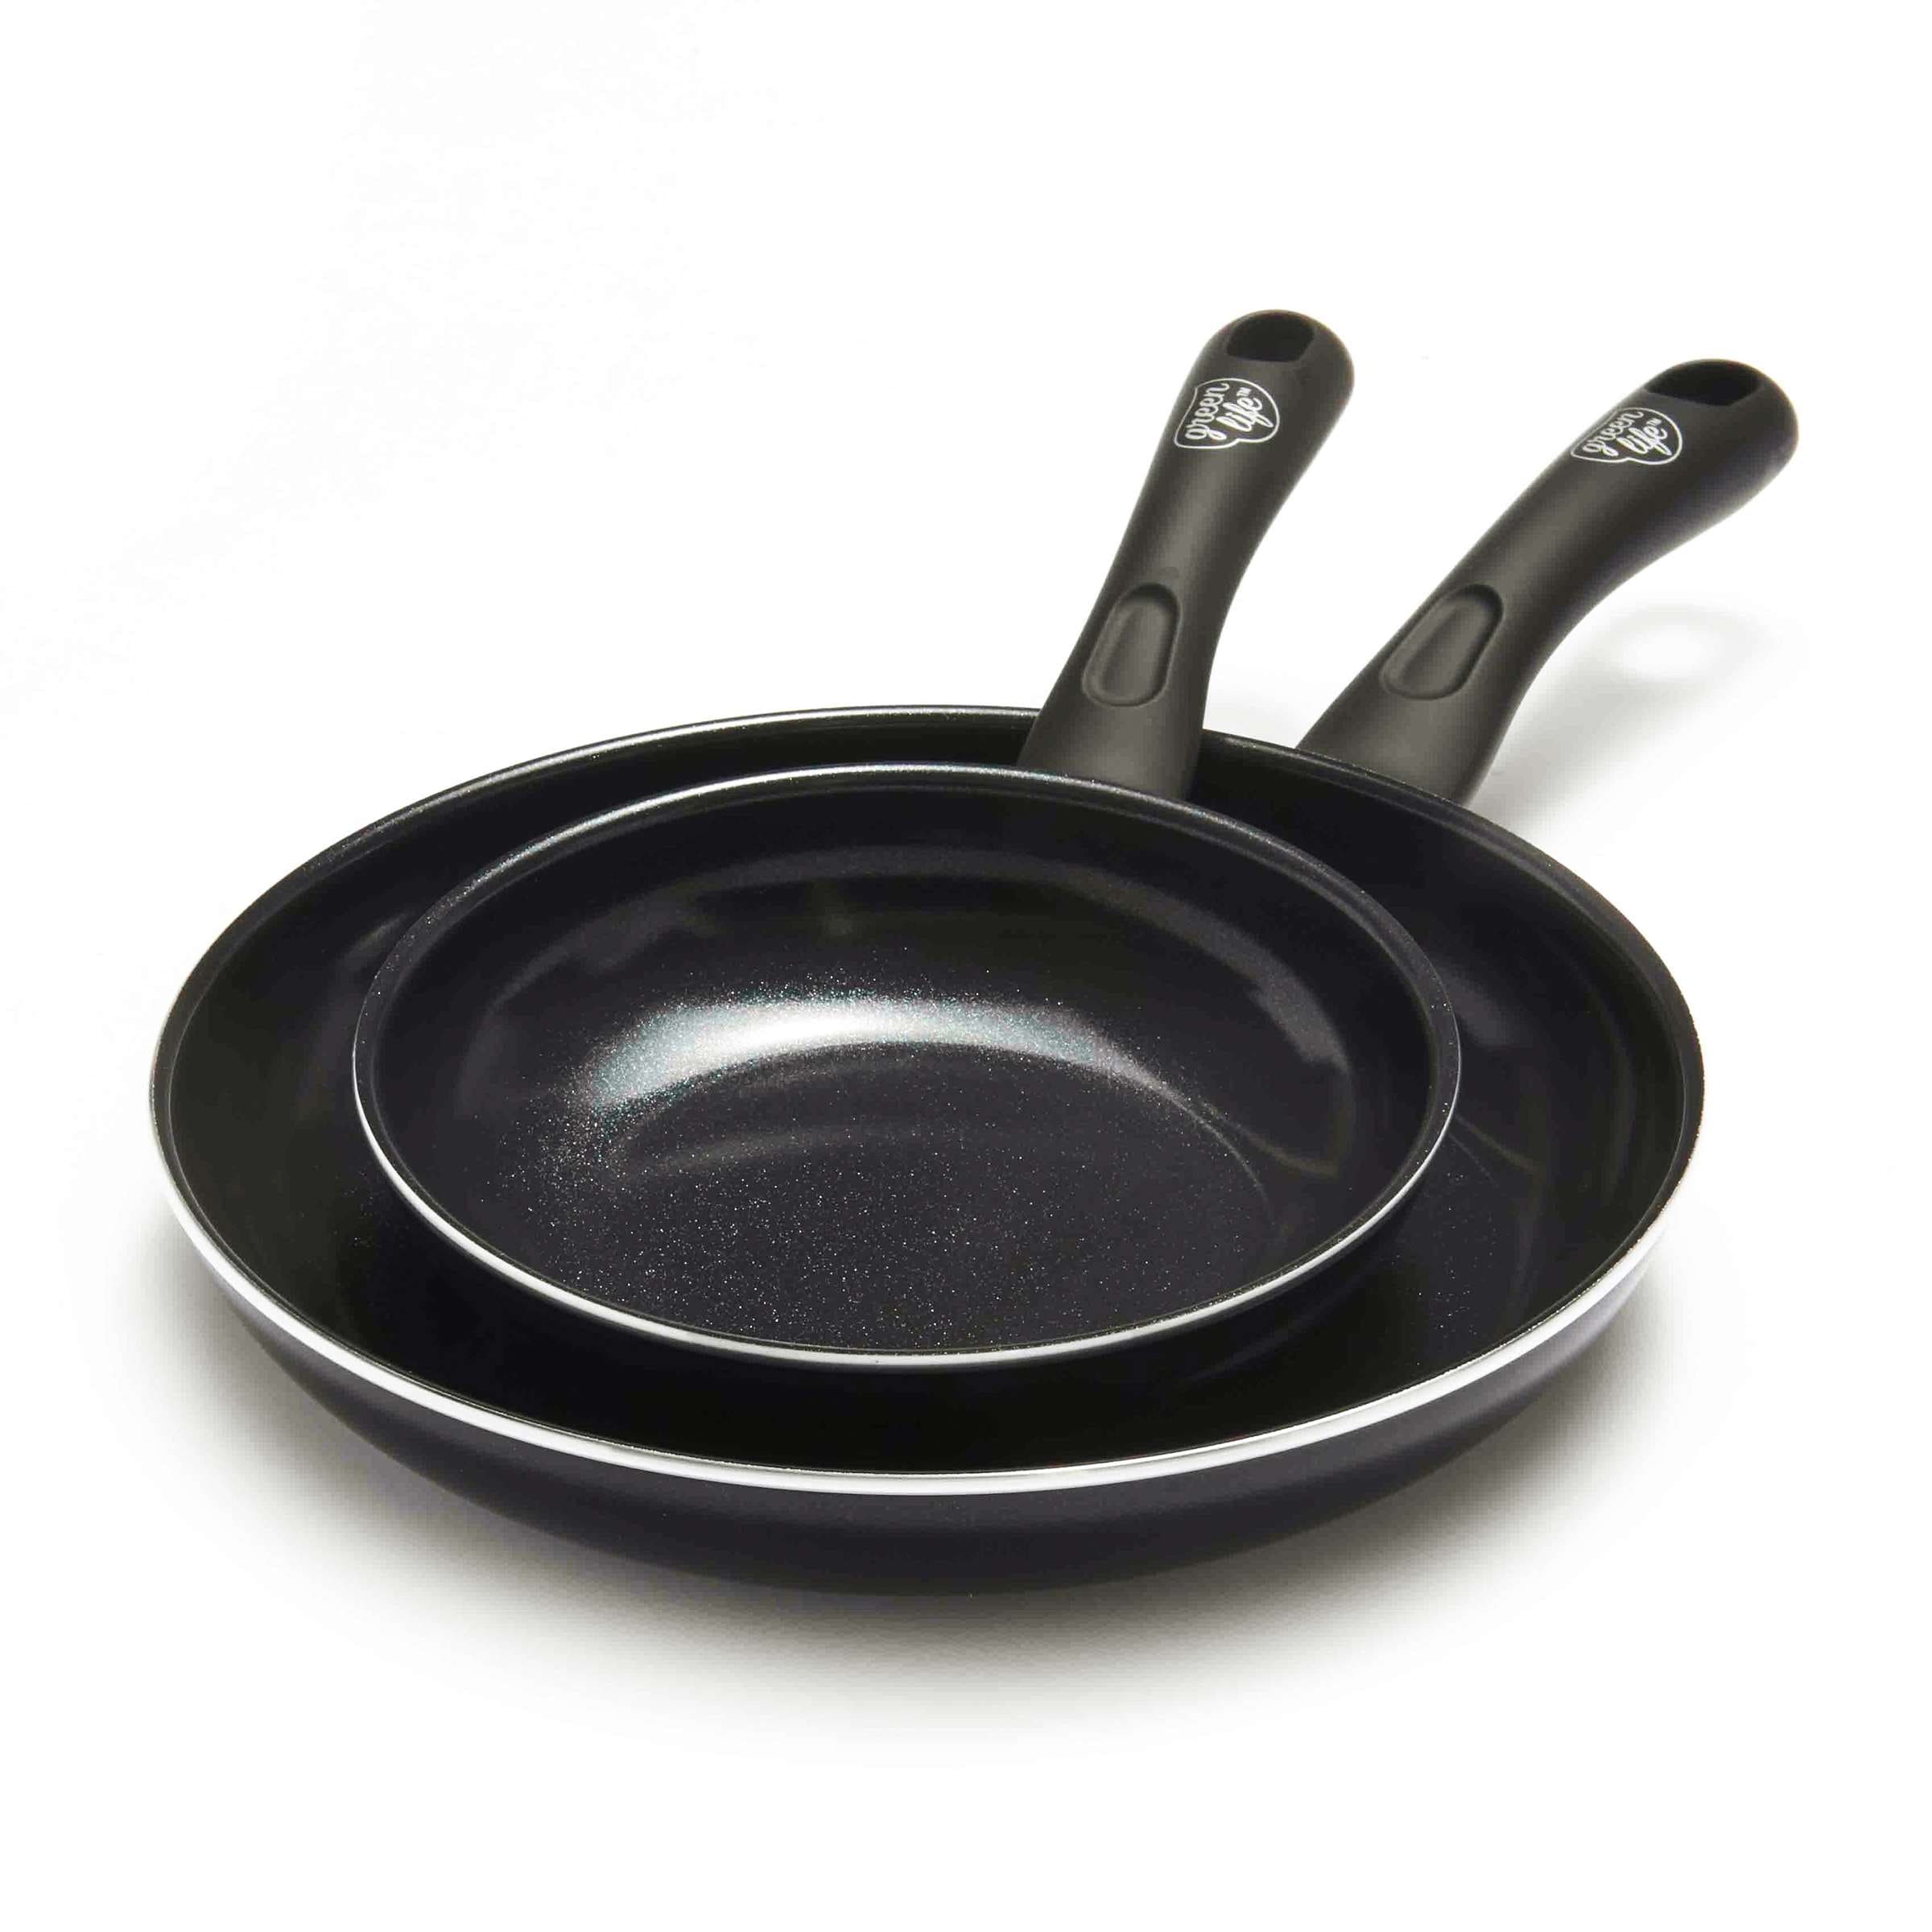 GreenLife Soft Grip Healthy Ceramic Nonstick 8 Fry Pan - On Sale